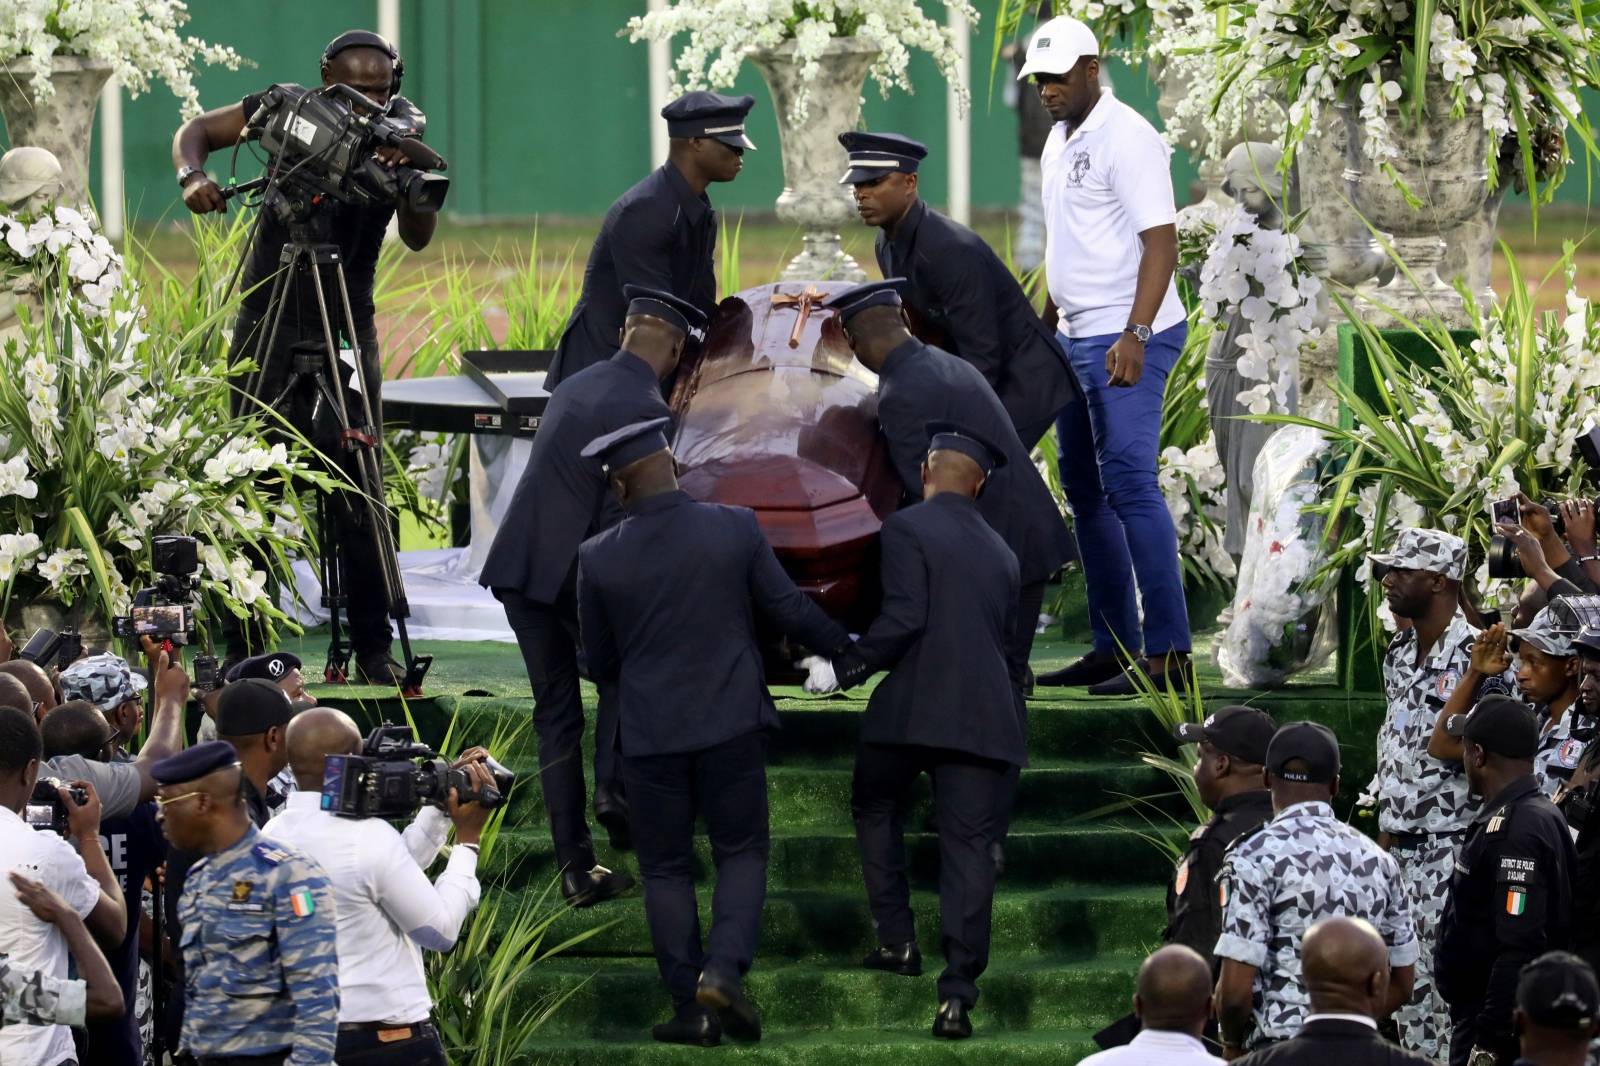 Men carry the casket of Ange Didier Houon, known as DJ Arafat, during his funeral ceremony in Abidjan